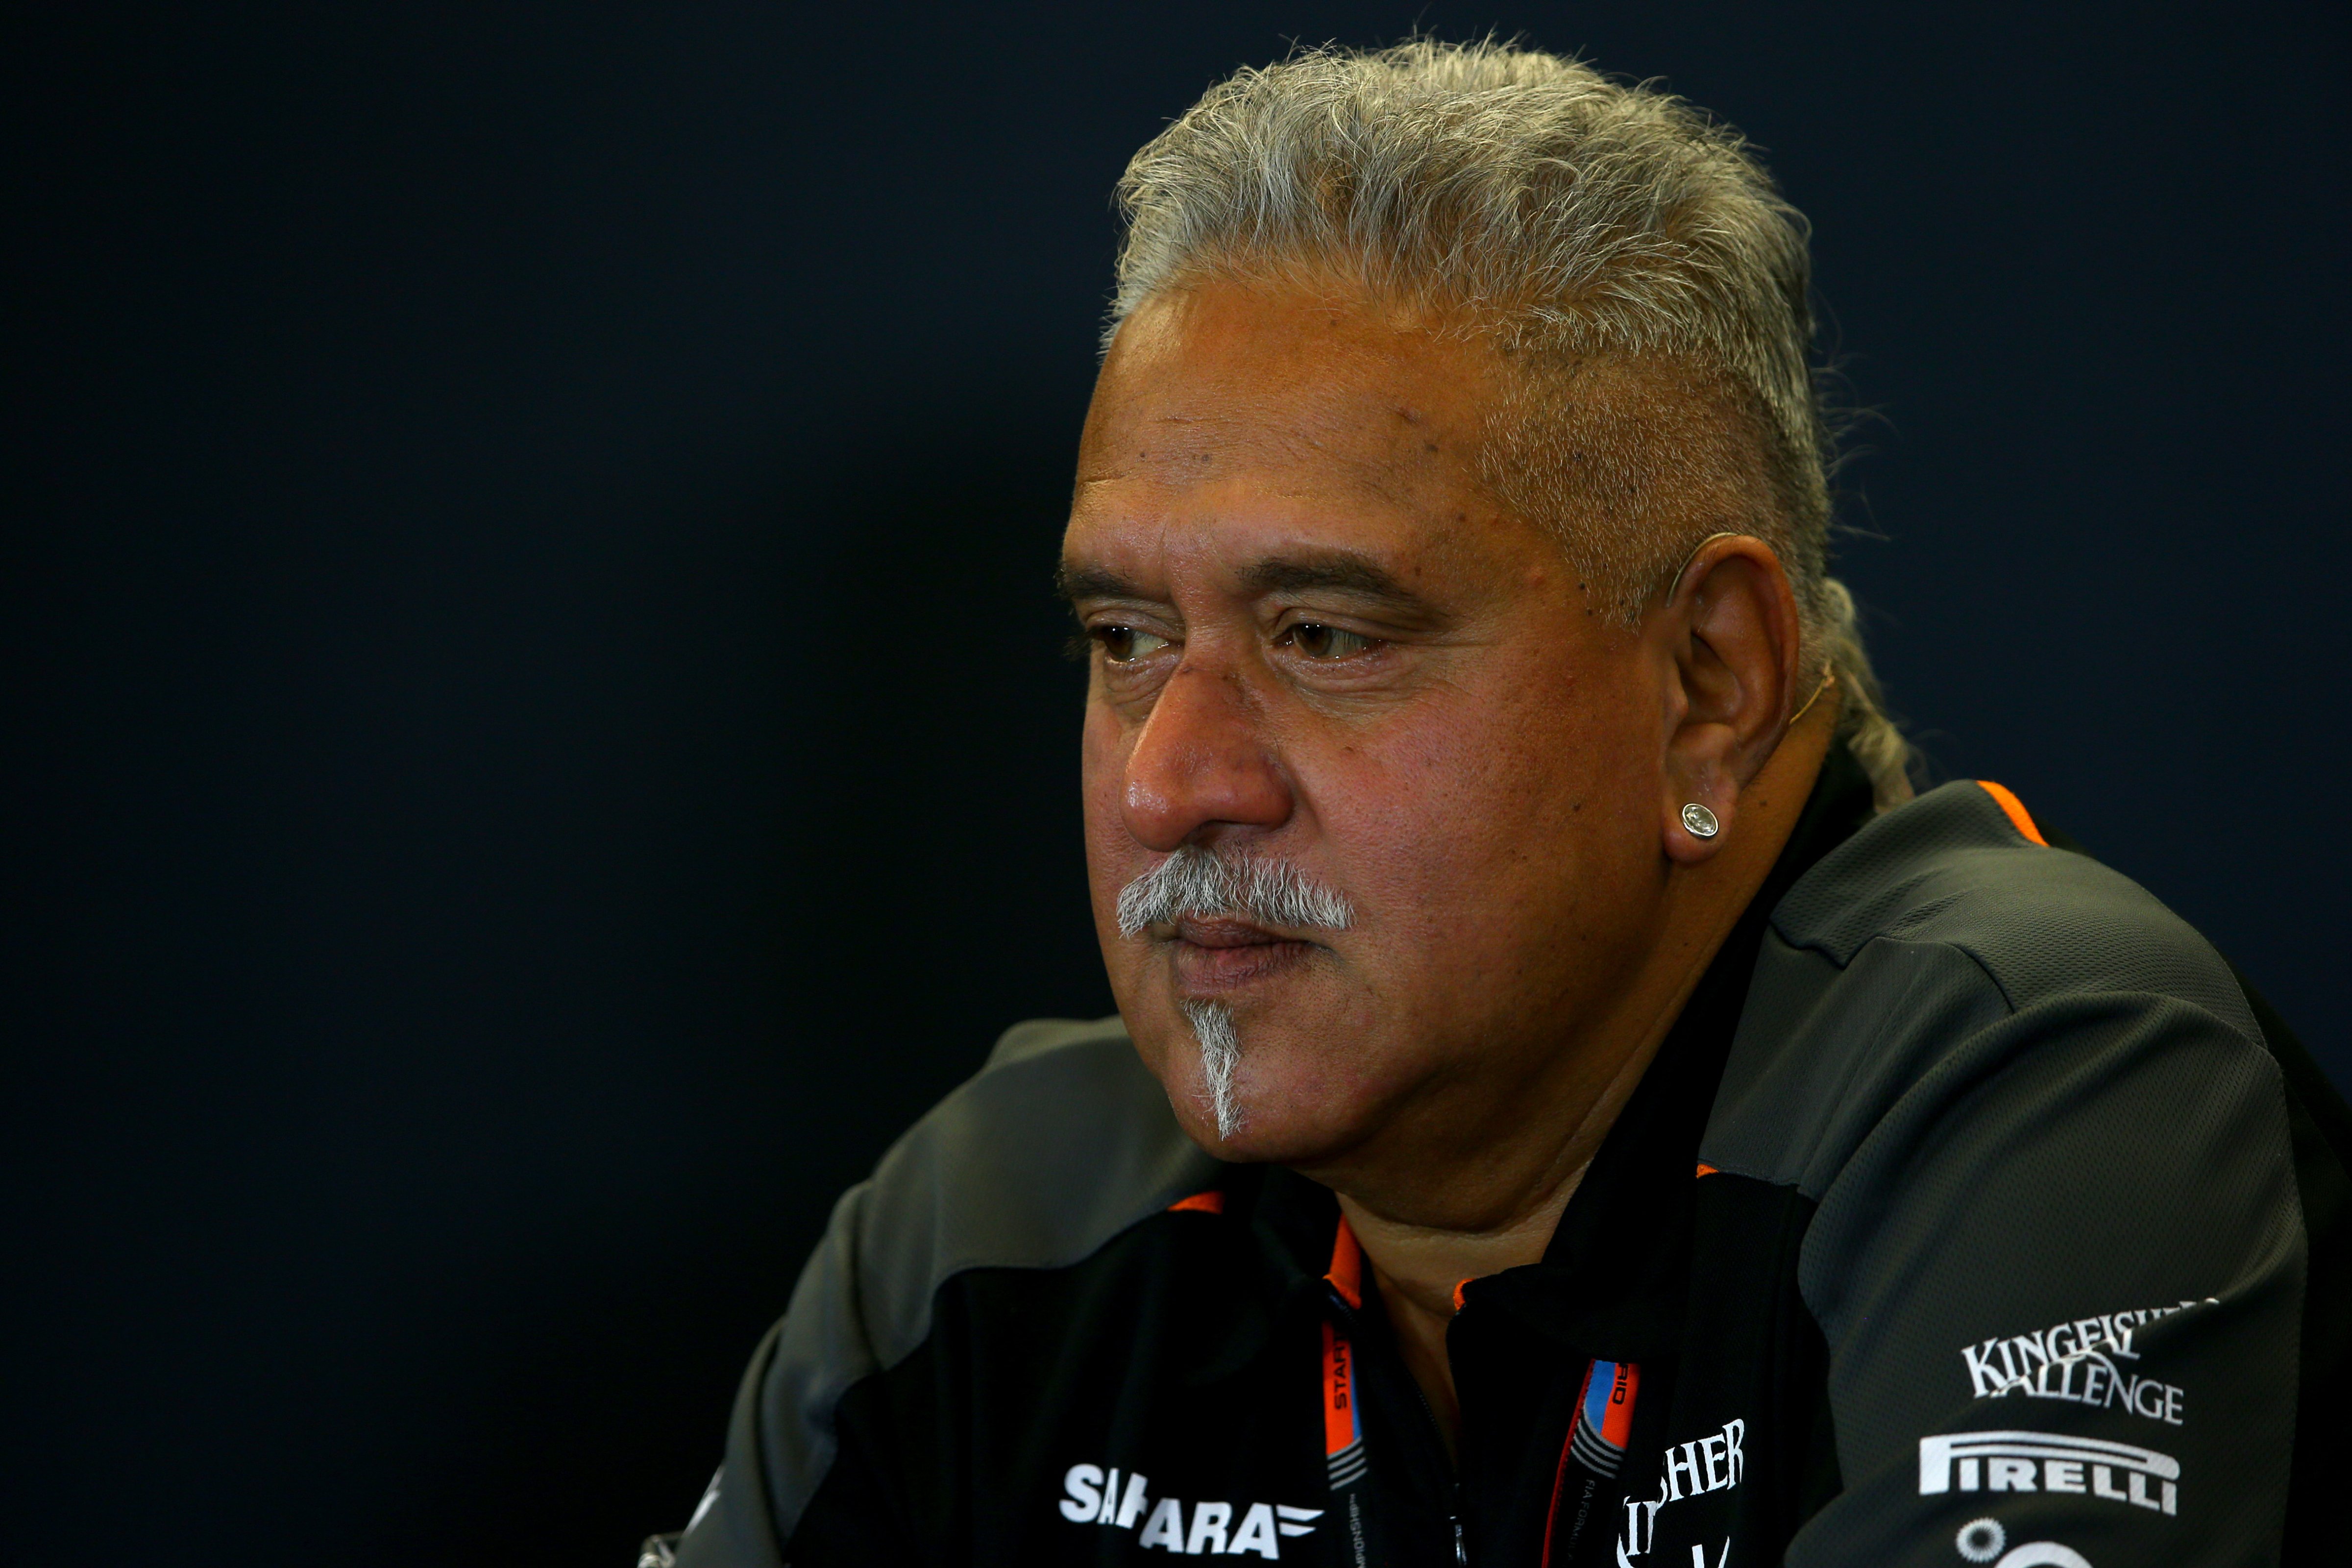 Indian tycoon Vijay Mallya attends a press conference after practice for the U.S. Formula One Grand Prix at Circuit of the Americas on Oct. 23, 2015 in Austin (Mark Thompson—Getty Images)